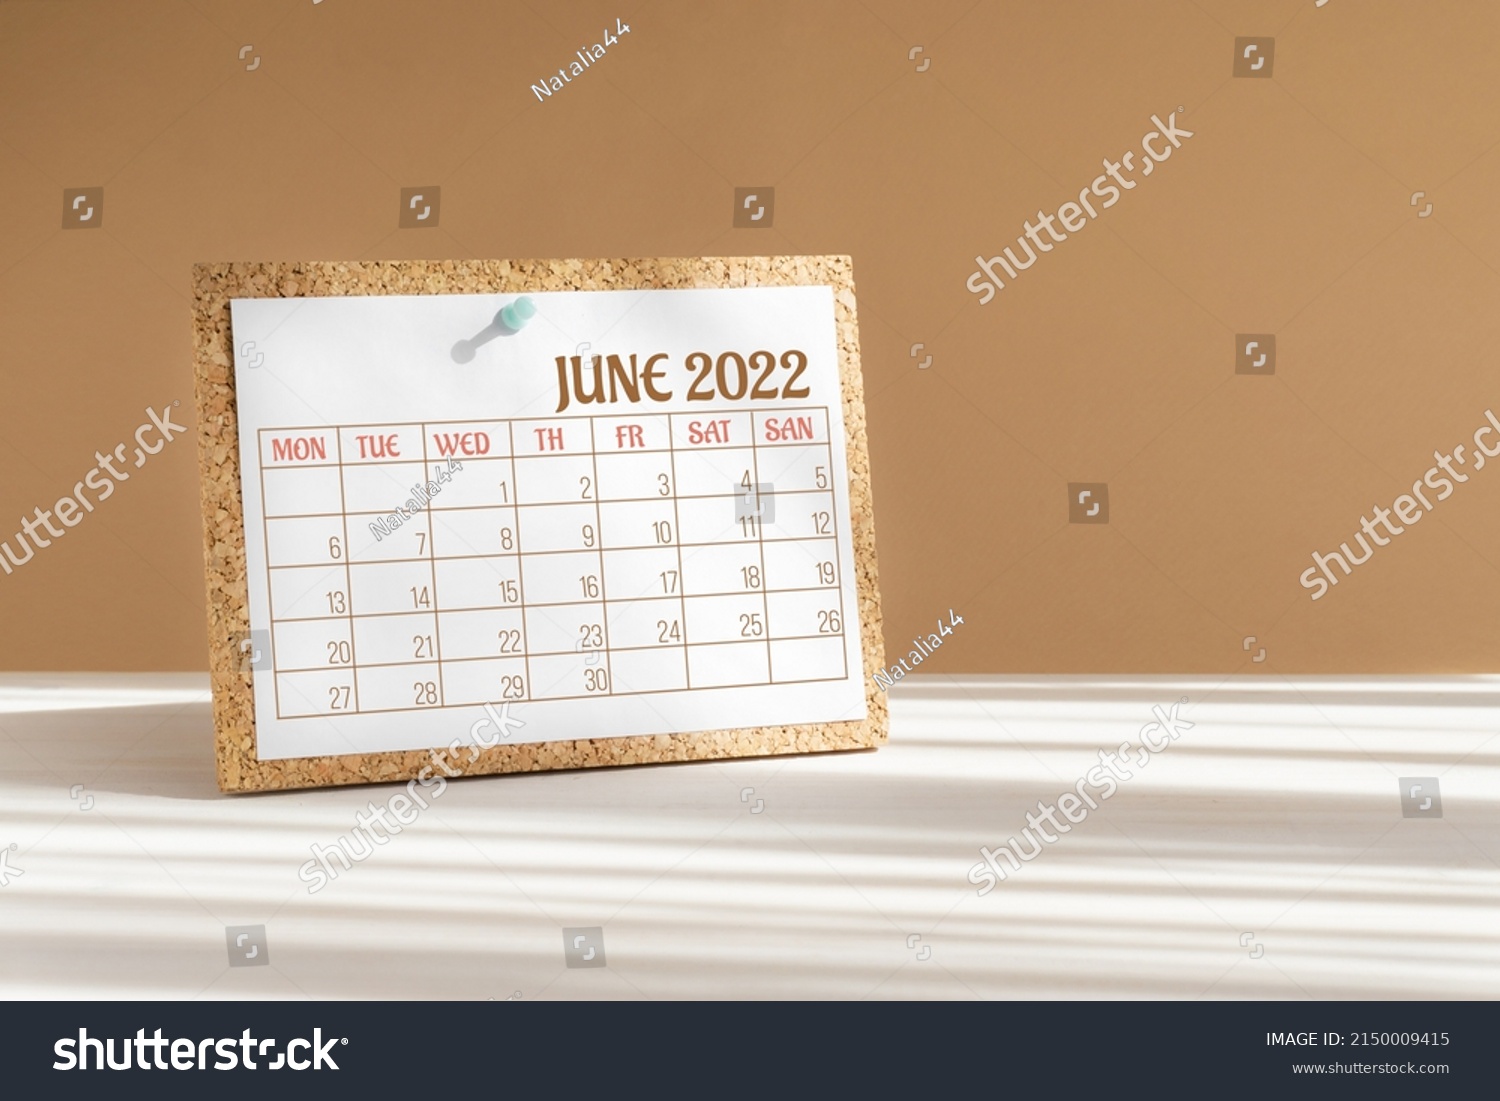 Calendar sheet for 2022. Desktop calendar for month of June, attached to cork board with a button on desktop. Concept of event planning, reminders. #2150009415